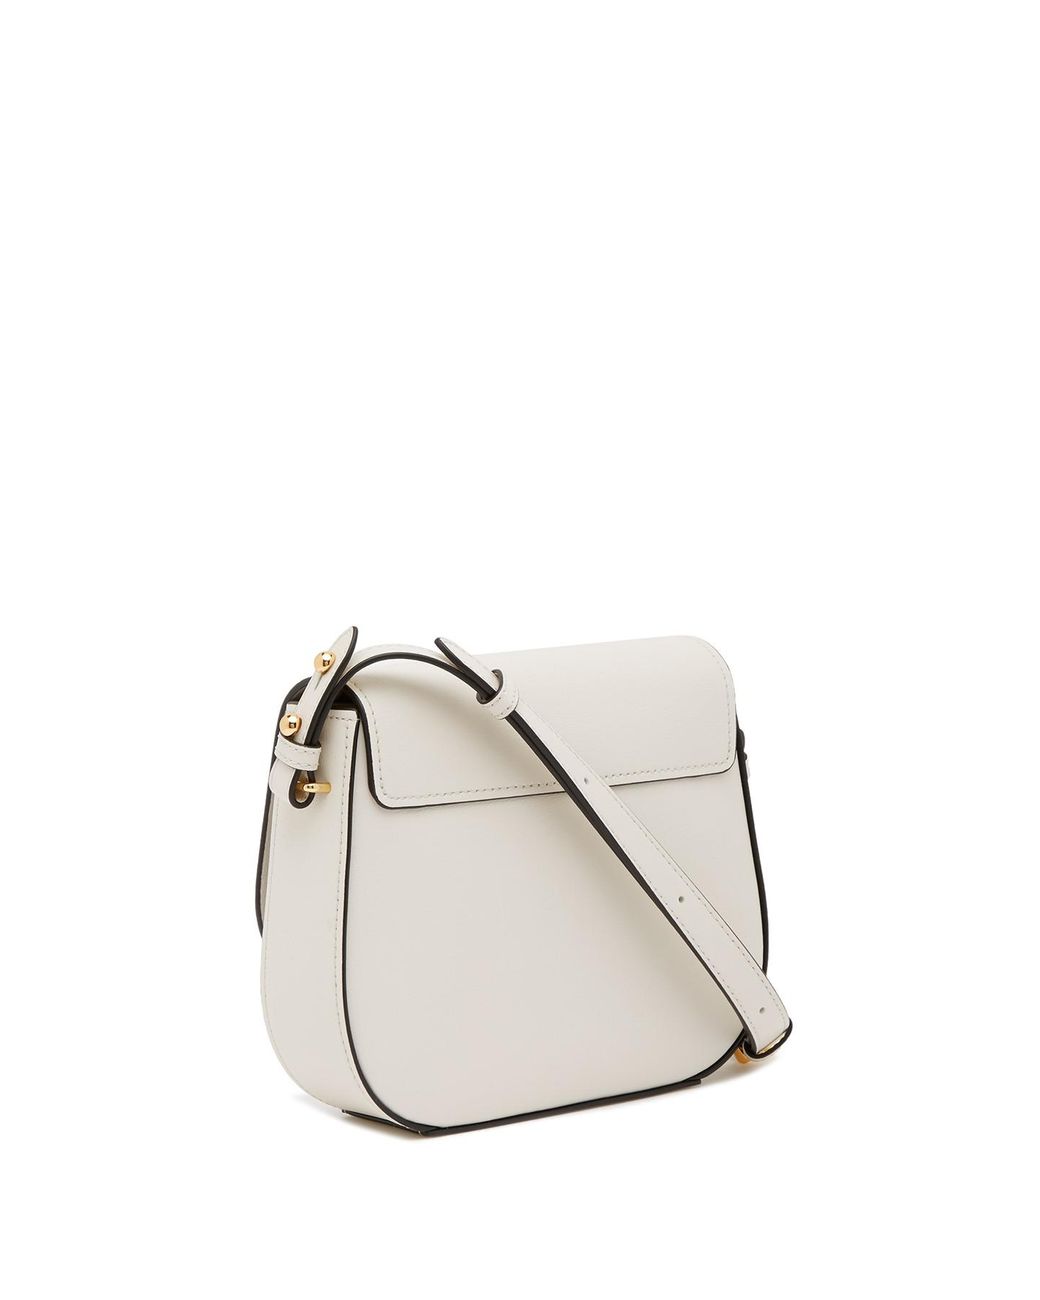 Marc Jacobs Crossbody Bag Graffiti Collage White Multicolor Cowhide Leather